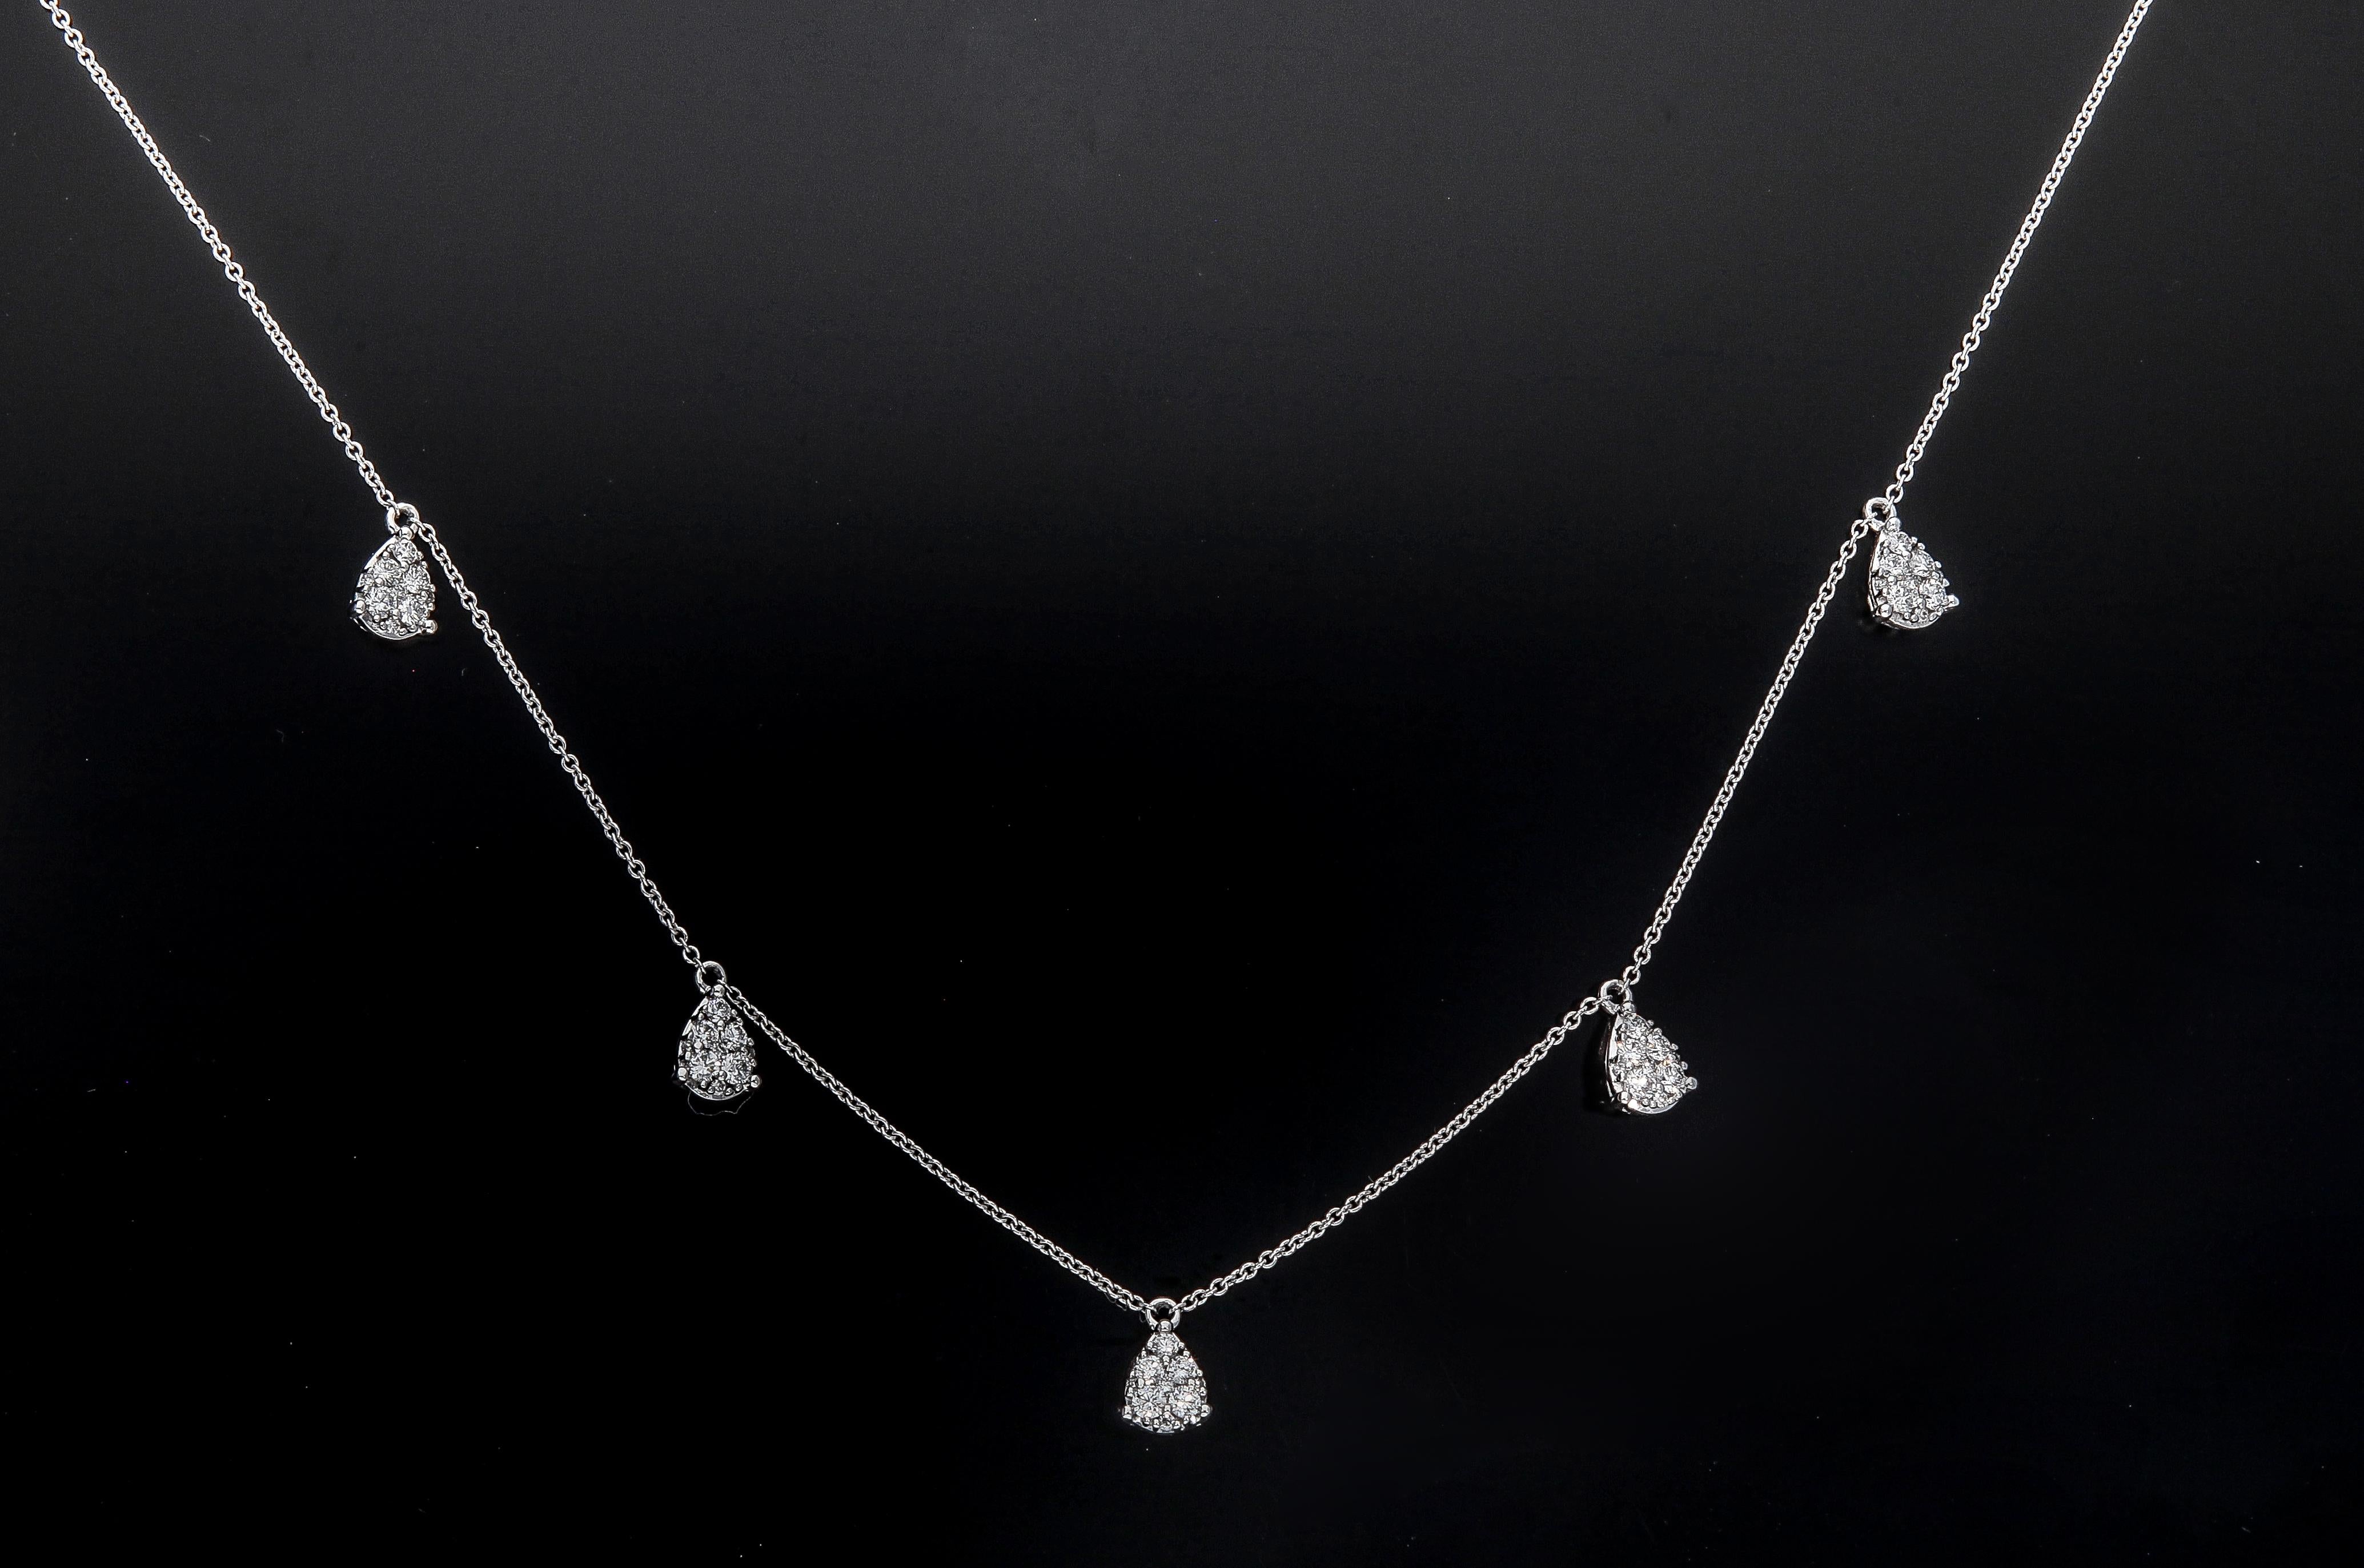 18 Karat White Gold Chain Necklace with Five Drop Pendant with Diamonds For Sale 7